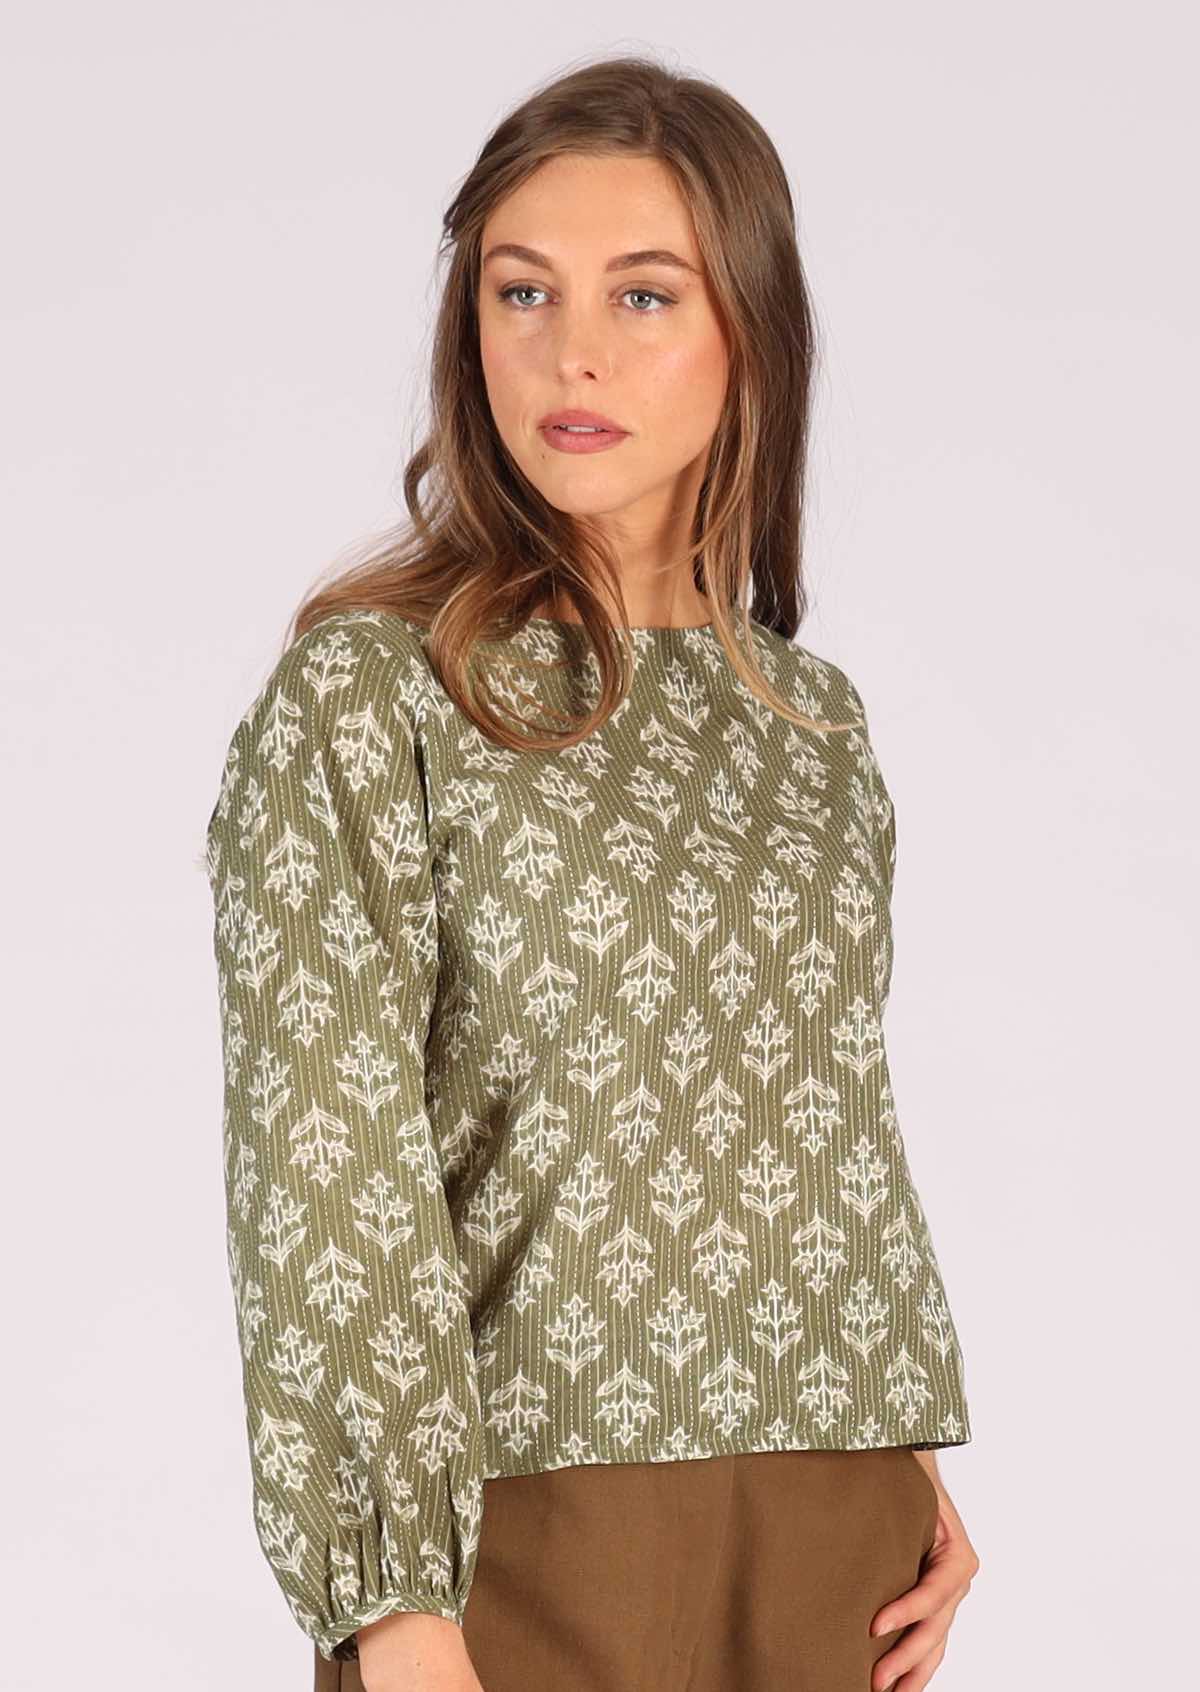 Sophisticated long sleeve cotton top in green with kantha stitches